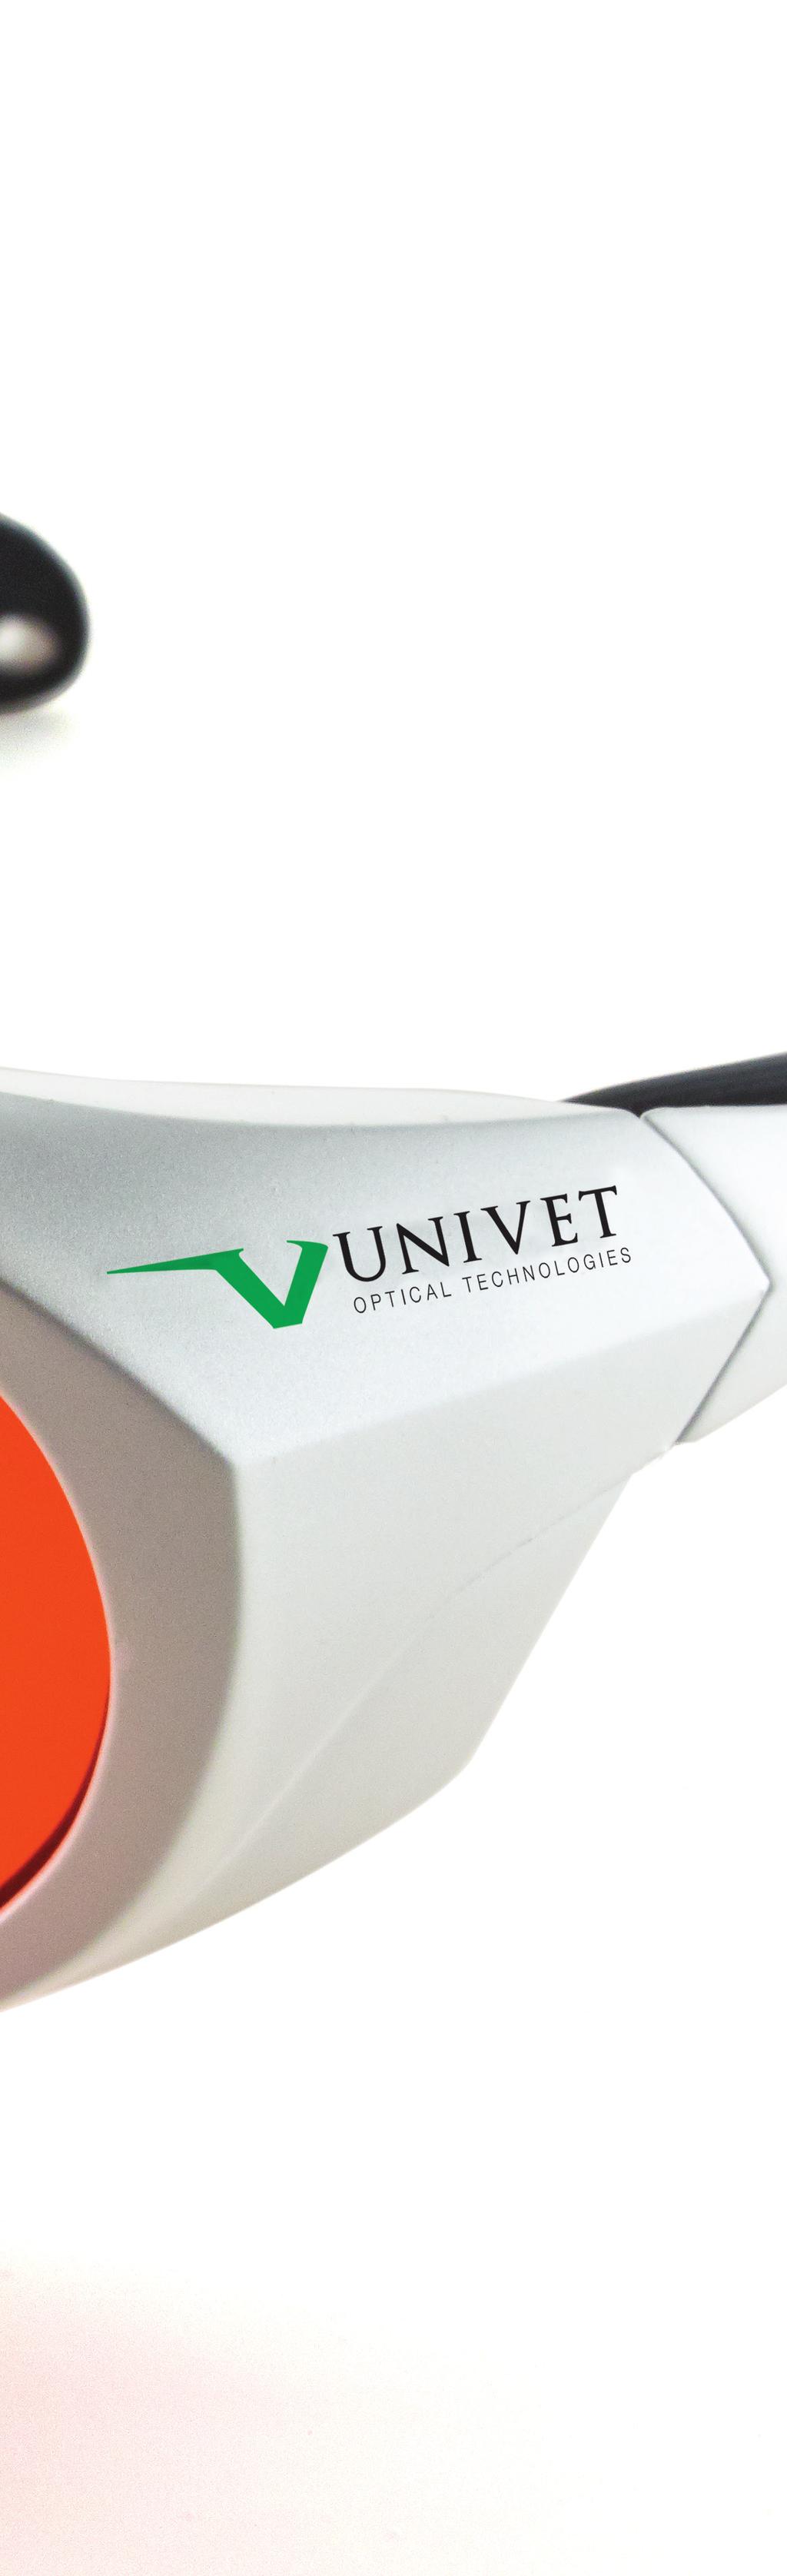 561 Versatile and innovative A spectacle with high technical content, result of Univet research and experience, it fits perfectly on user face thanks to the